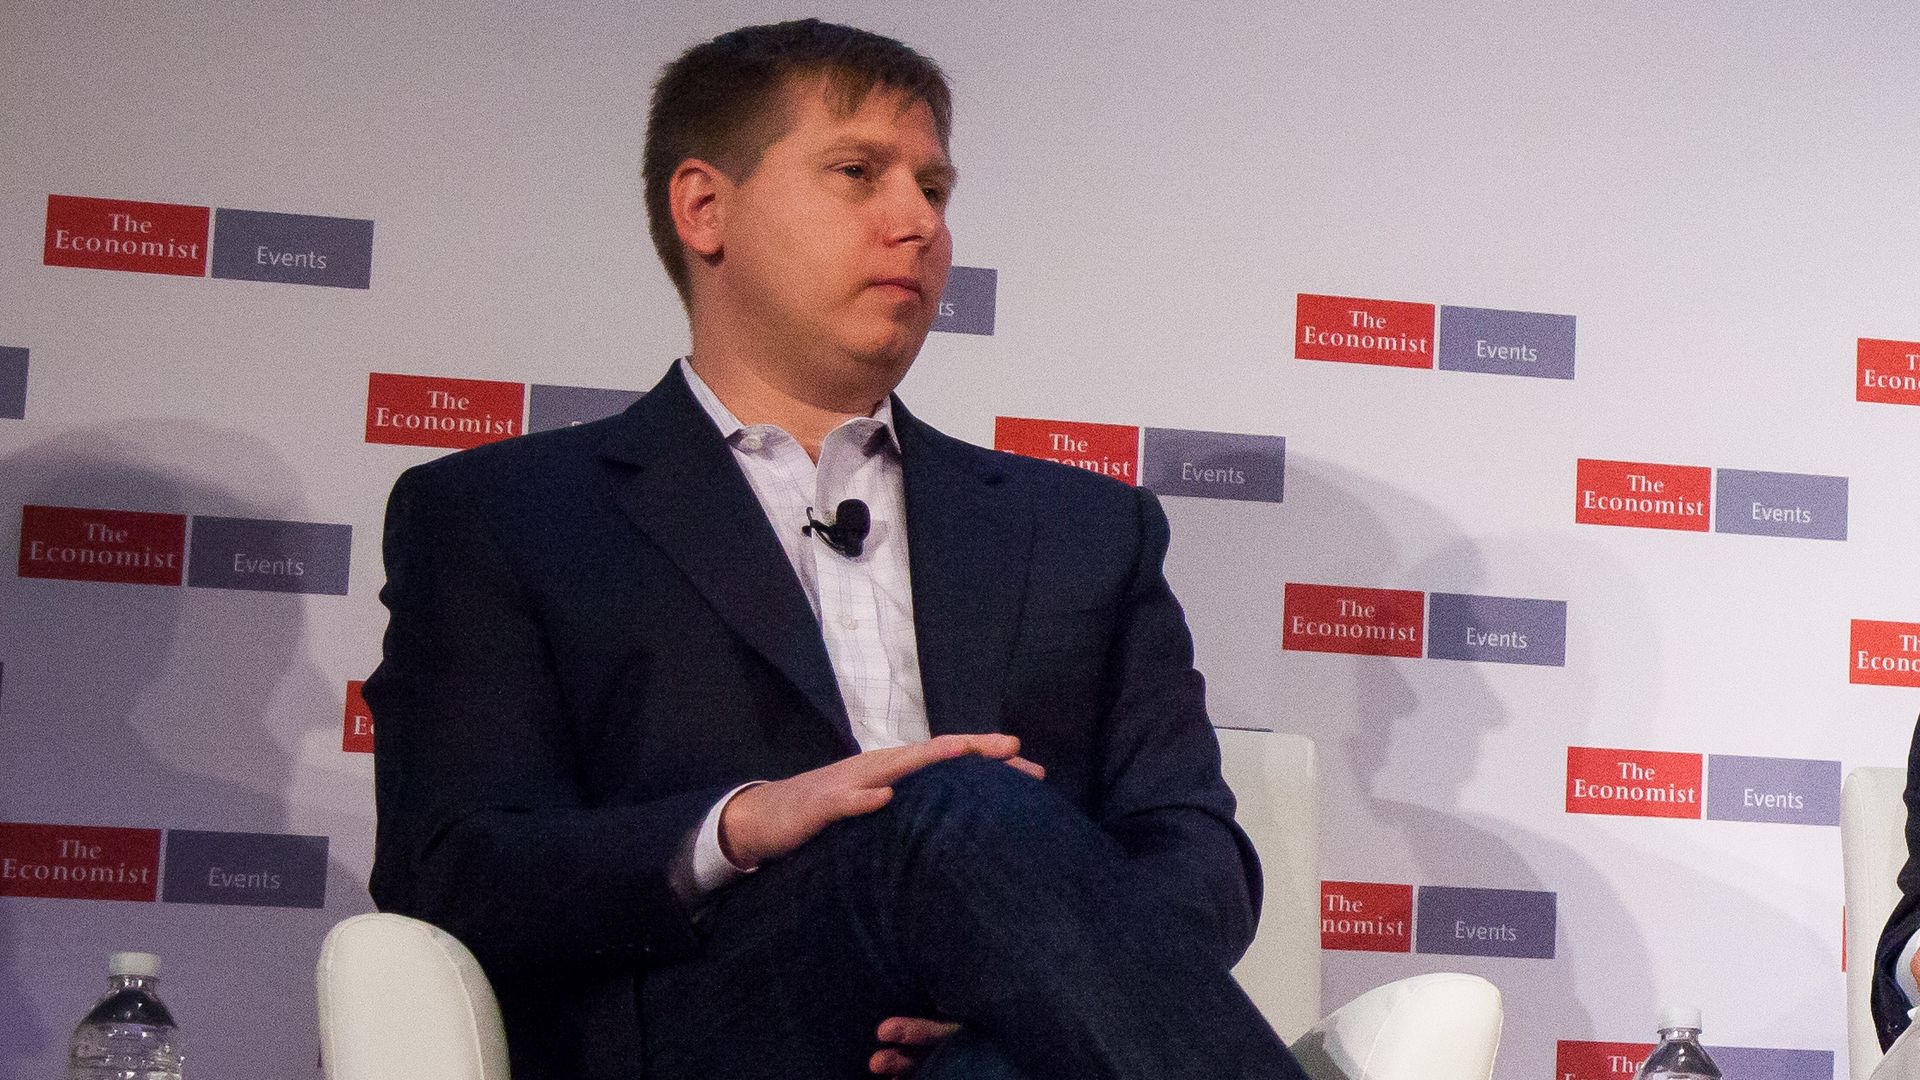 Barry Silbert, founder and chief executive officer of Digital Currency Group Inc., during The Economist's Finance Disrupted conference in New York, U.S., on Thursday, Oct. 13, 2016